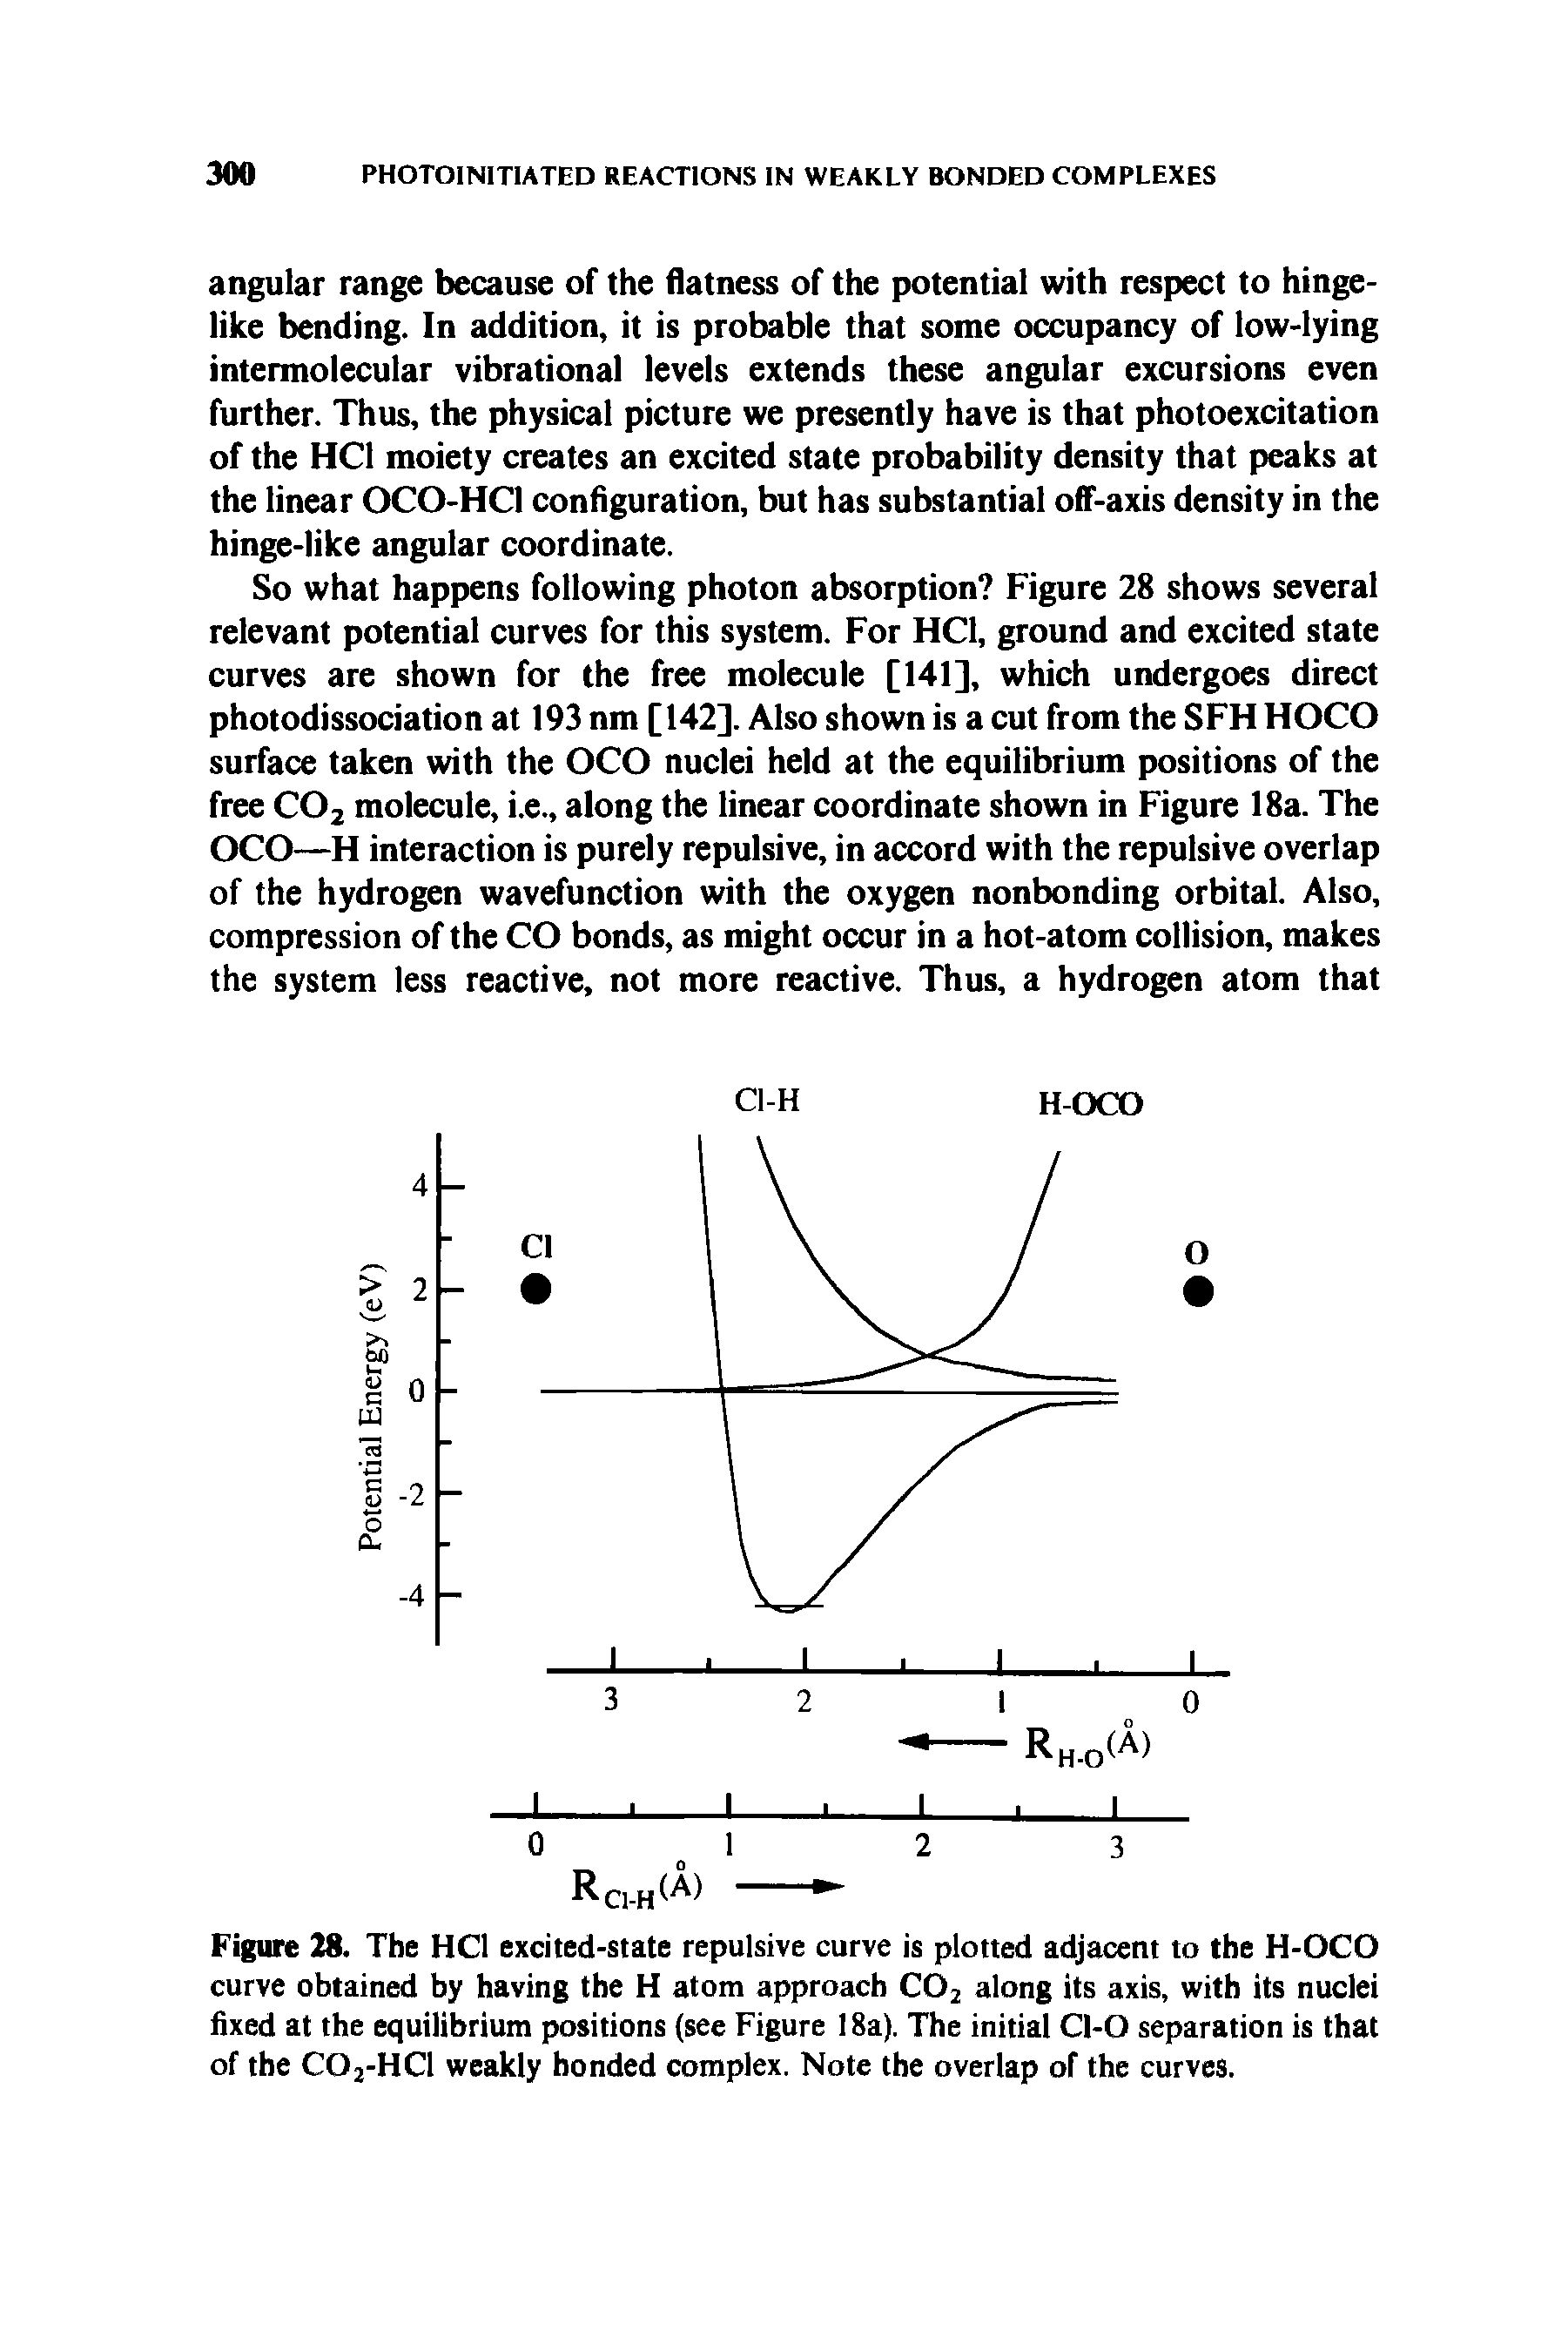 Figure 28. The HCl excited-state repulsive curve is plotted adjacent to the H-OCO curve obtained by having the H atom approach CO along its axis, with its nuclei fixed at the equilibrium positions (see Figure 18a). The initial Cl-O separation is that of the COj-HCl weakly bonded complex. Note the overlap of the curves.